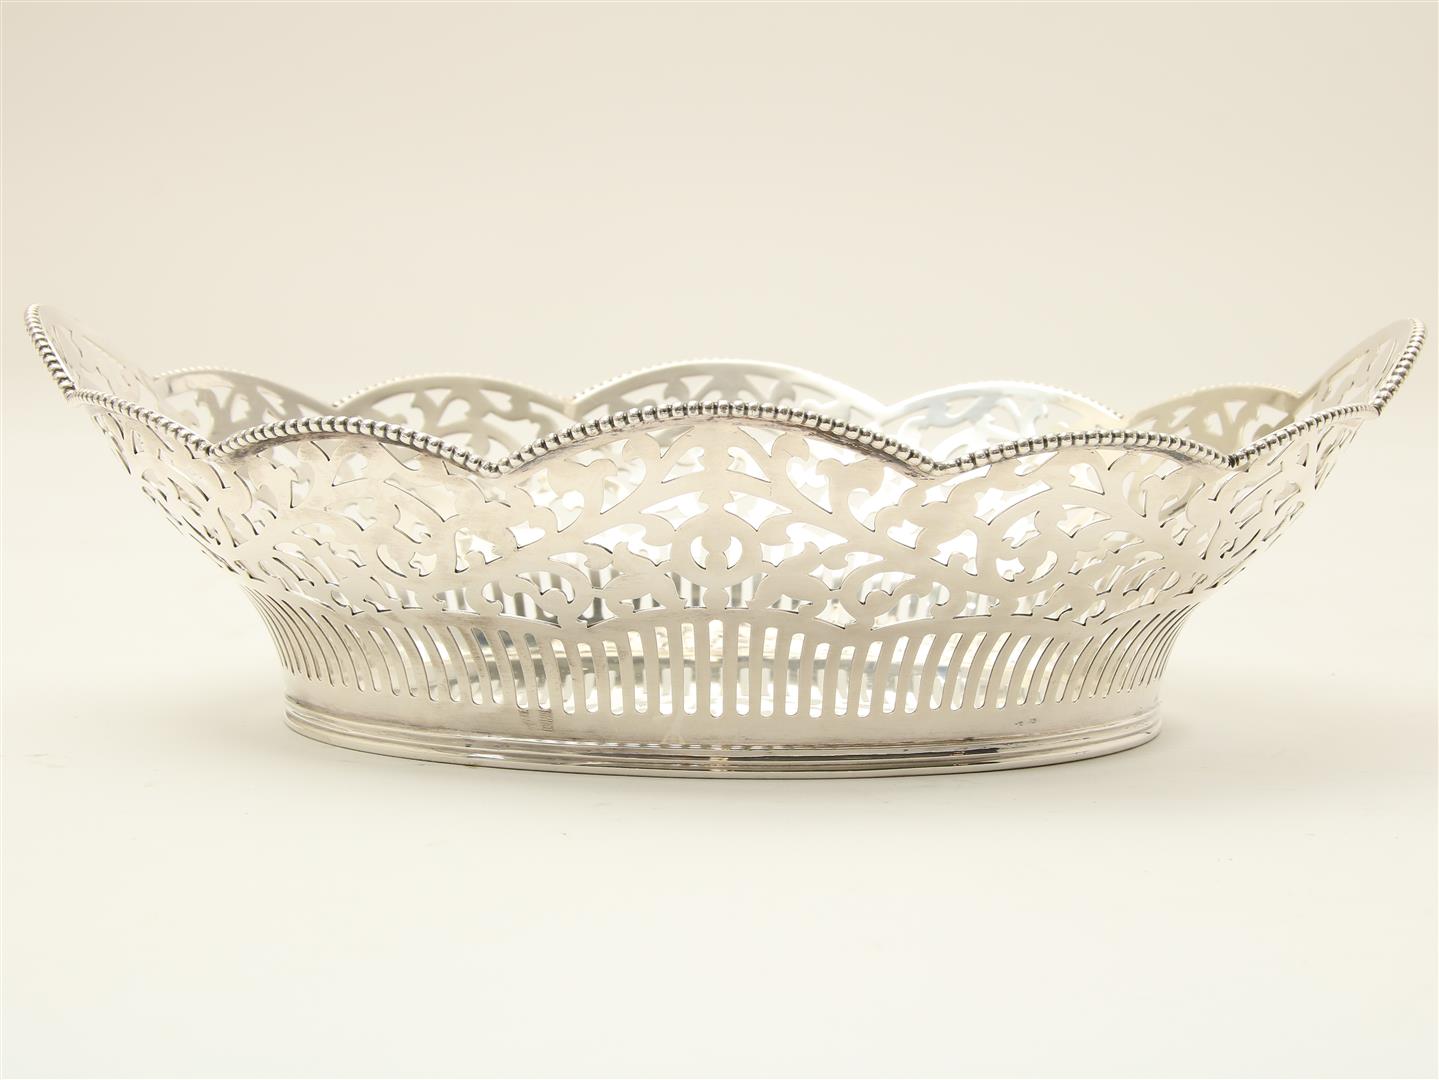 Openwork silver bread basket with curl and bar motif, trimmed with pearl edge, grade 835/000,